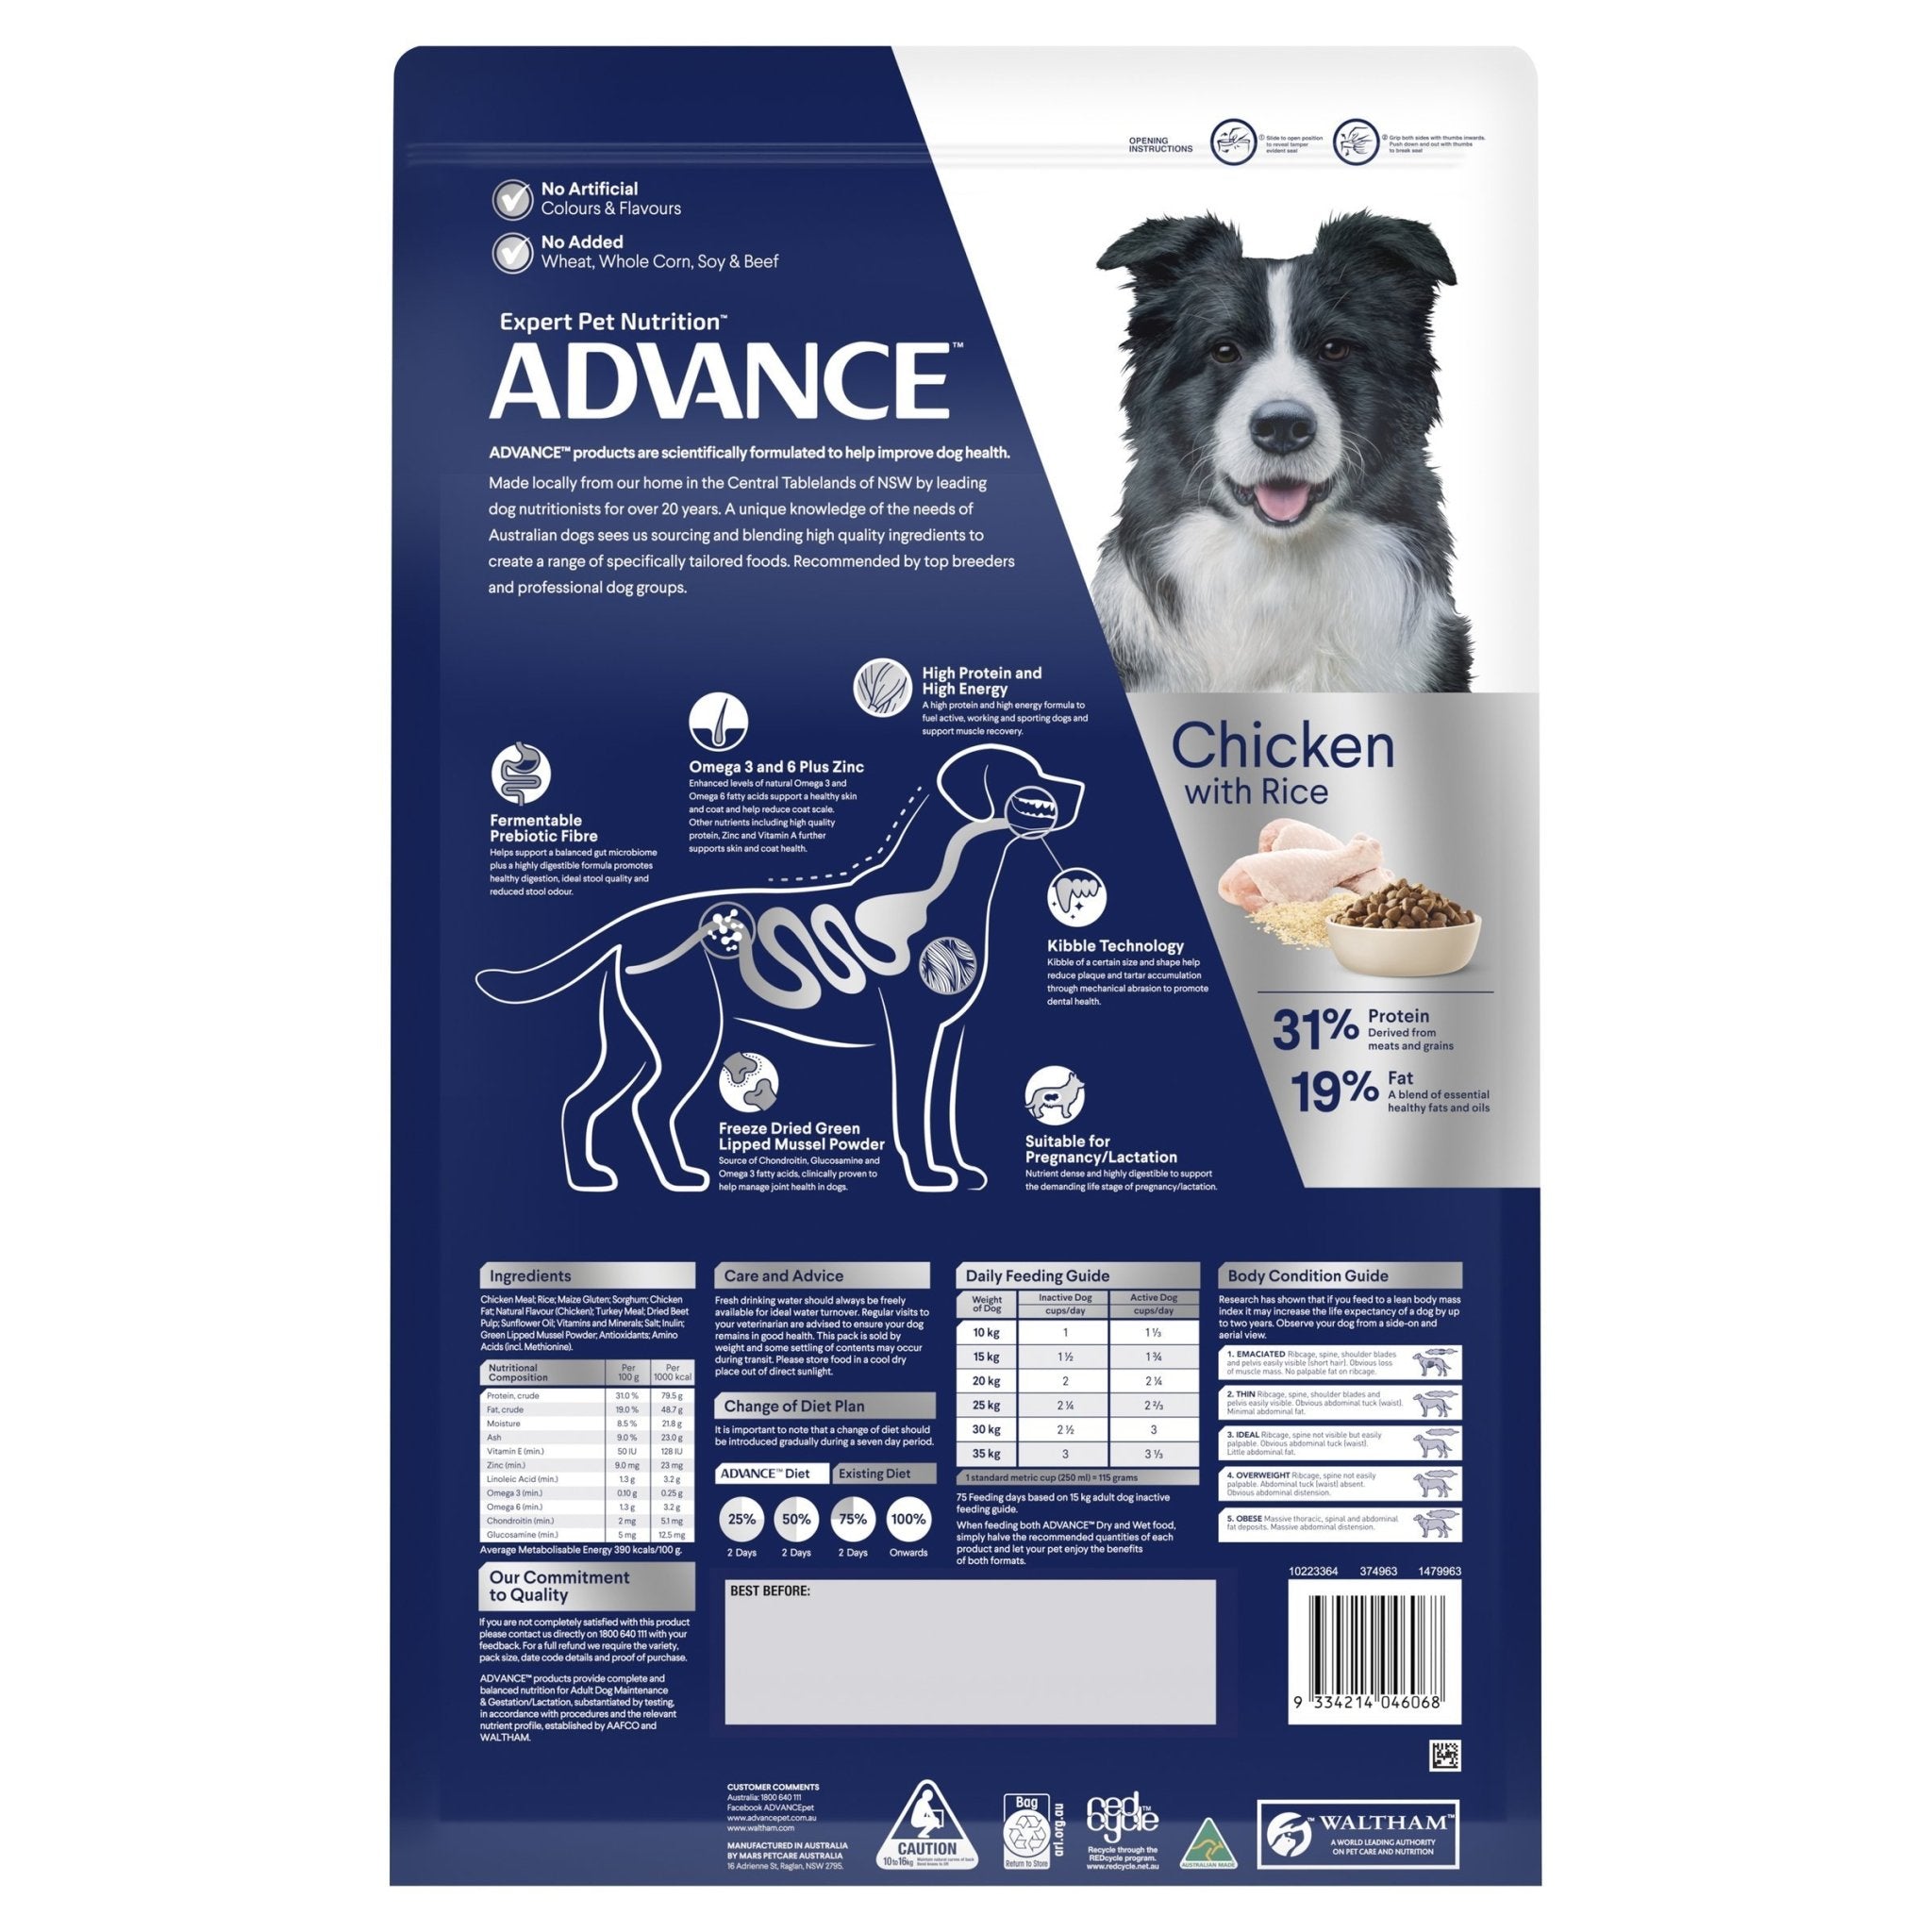 ADVANCE Active Adult Dry Dog Food Chicken with Rice